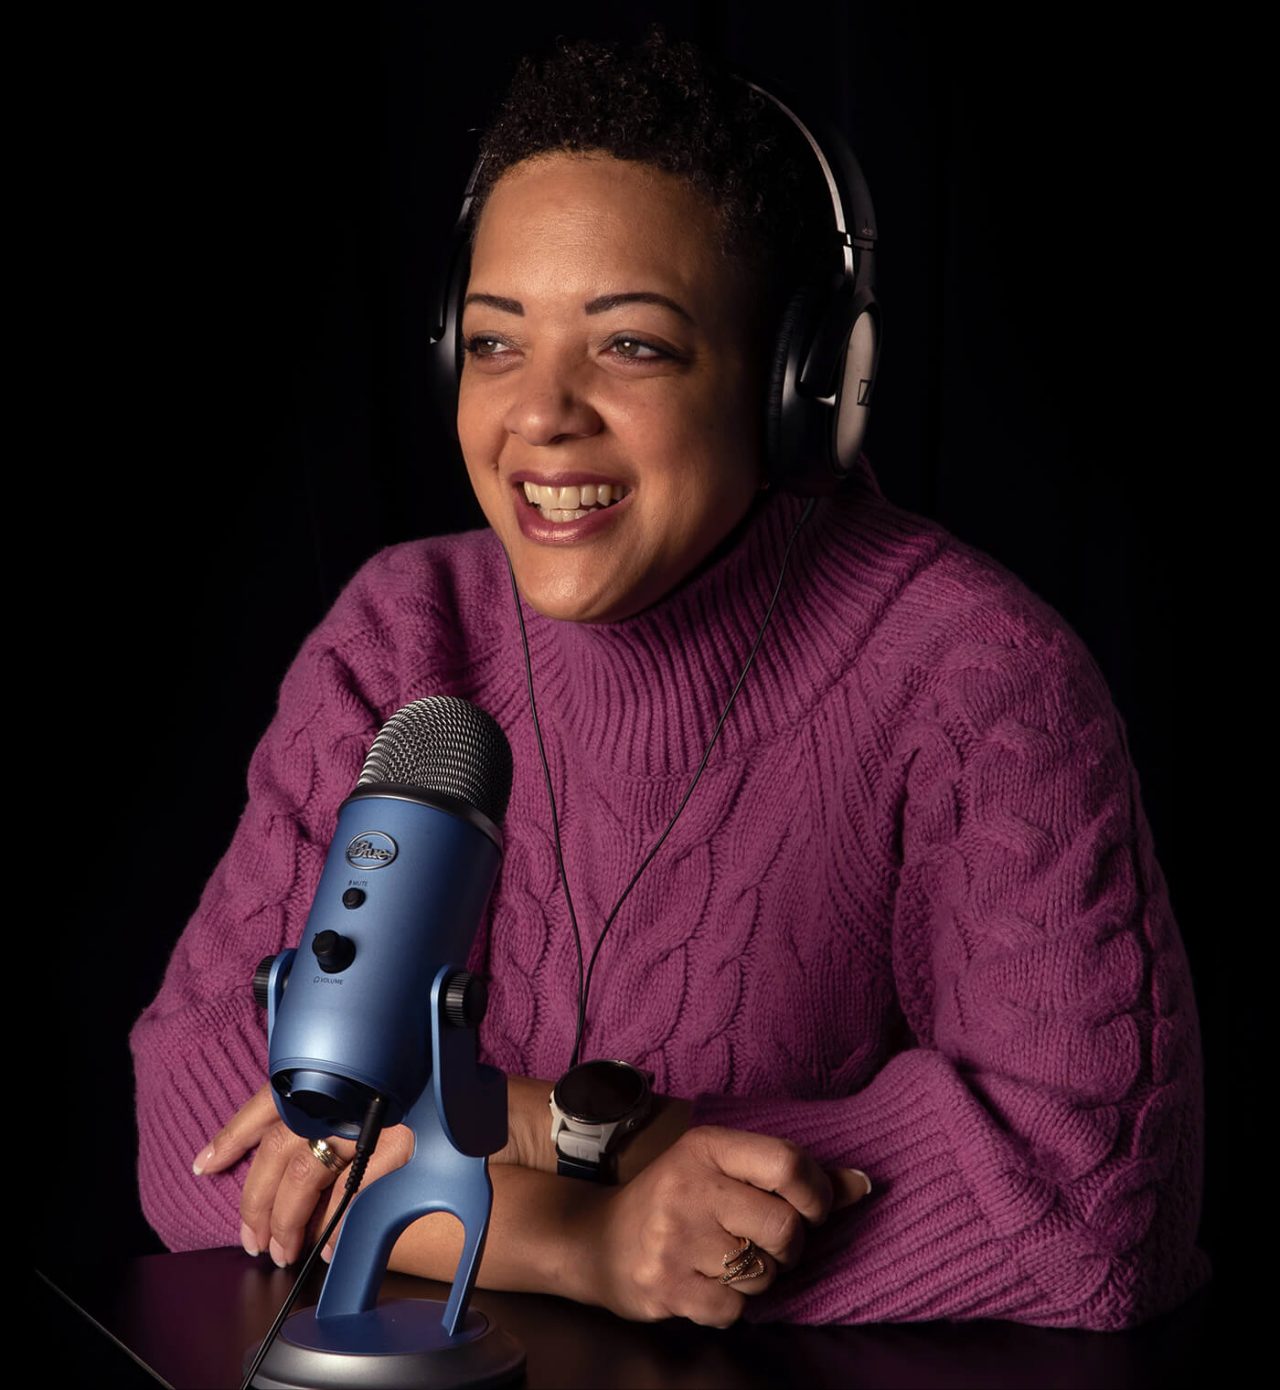 ORESU Community Affairs Director Millicent Ruffin co-hosts Corning’s “Vital Voices” podcast.